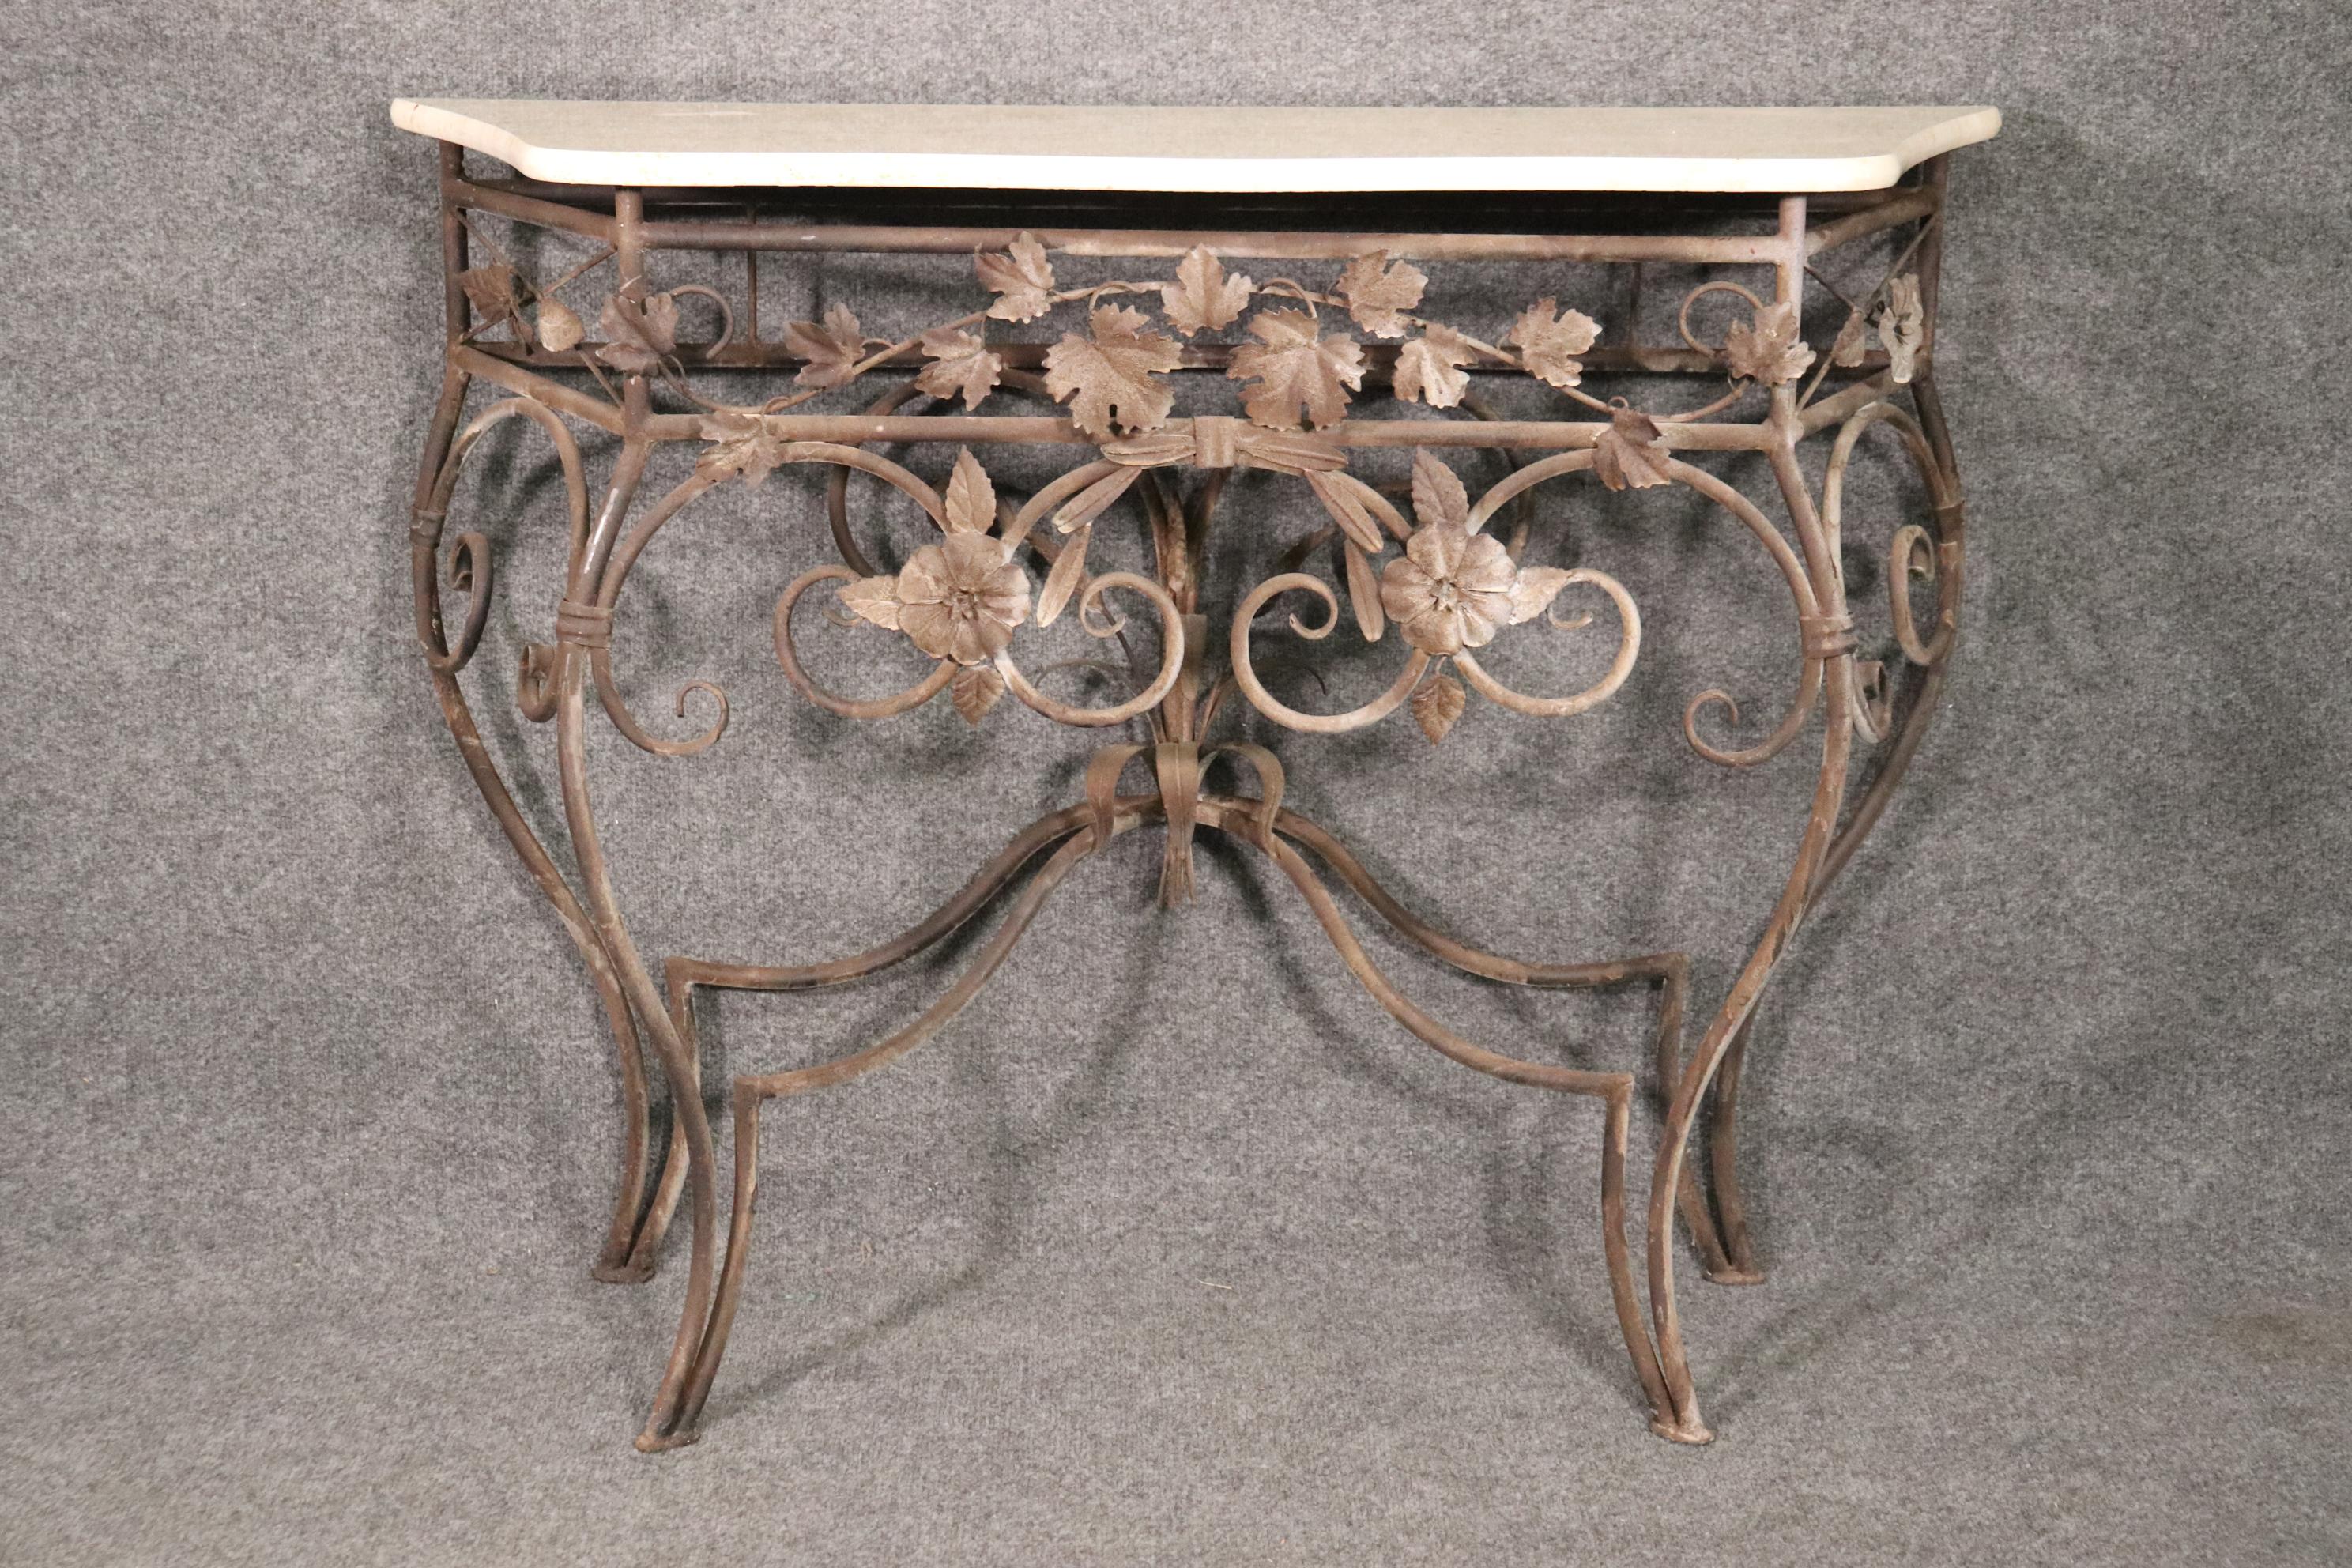 Neoclassical Revival Italian Marble Top Wrought Iron Console Table and Matching Mirror, circa 1920s For Sale